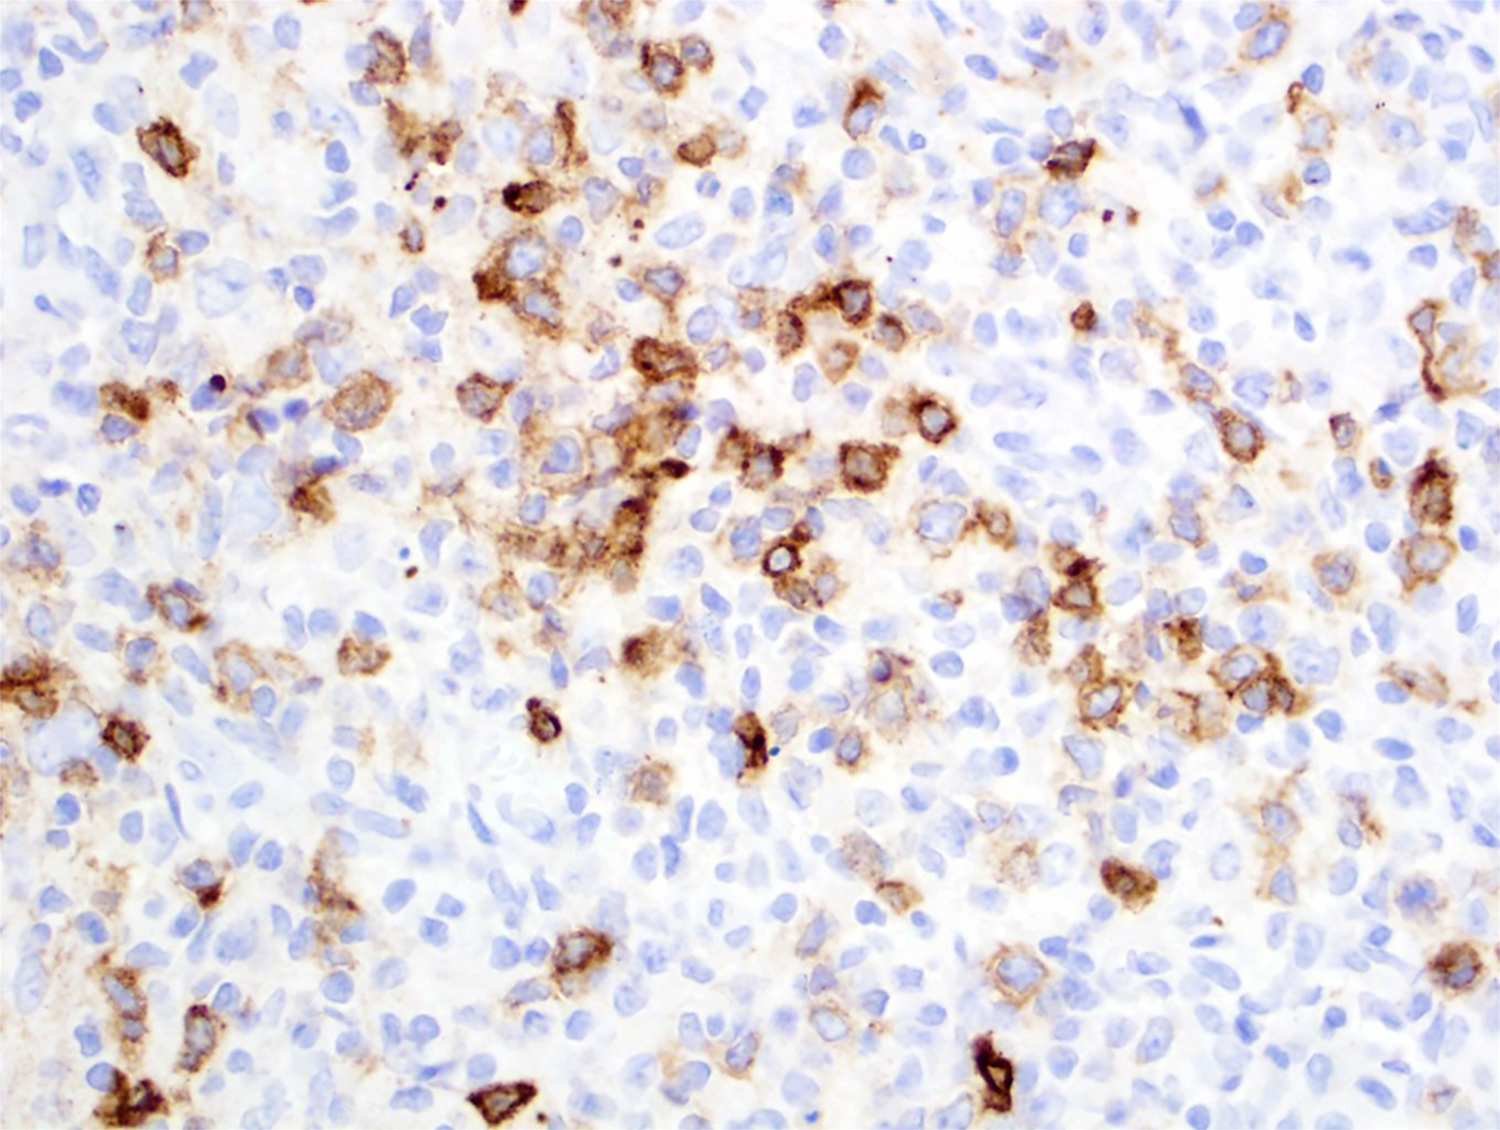 CD10 in small and intermediate size lymphoma cells